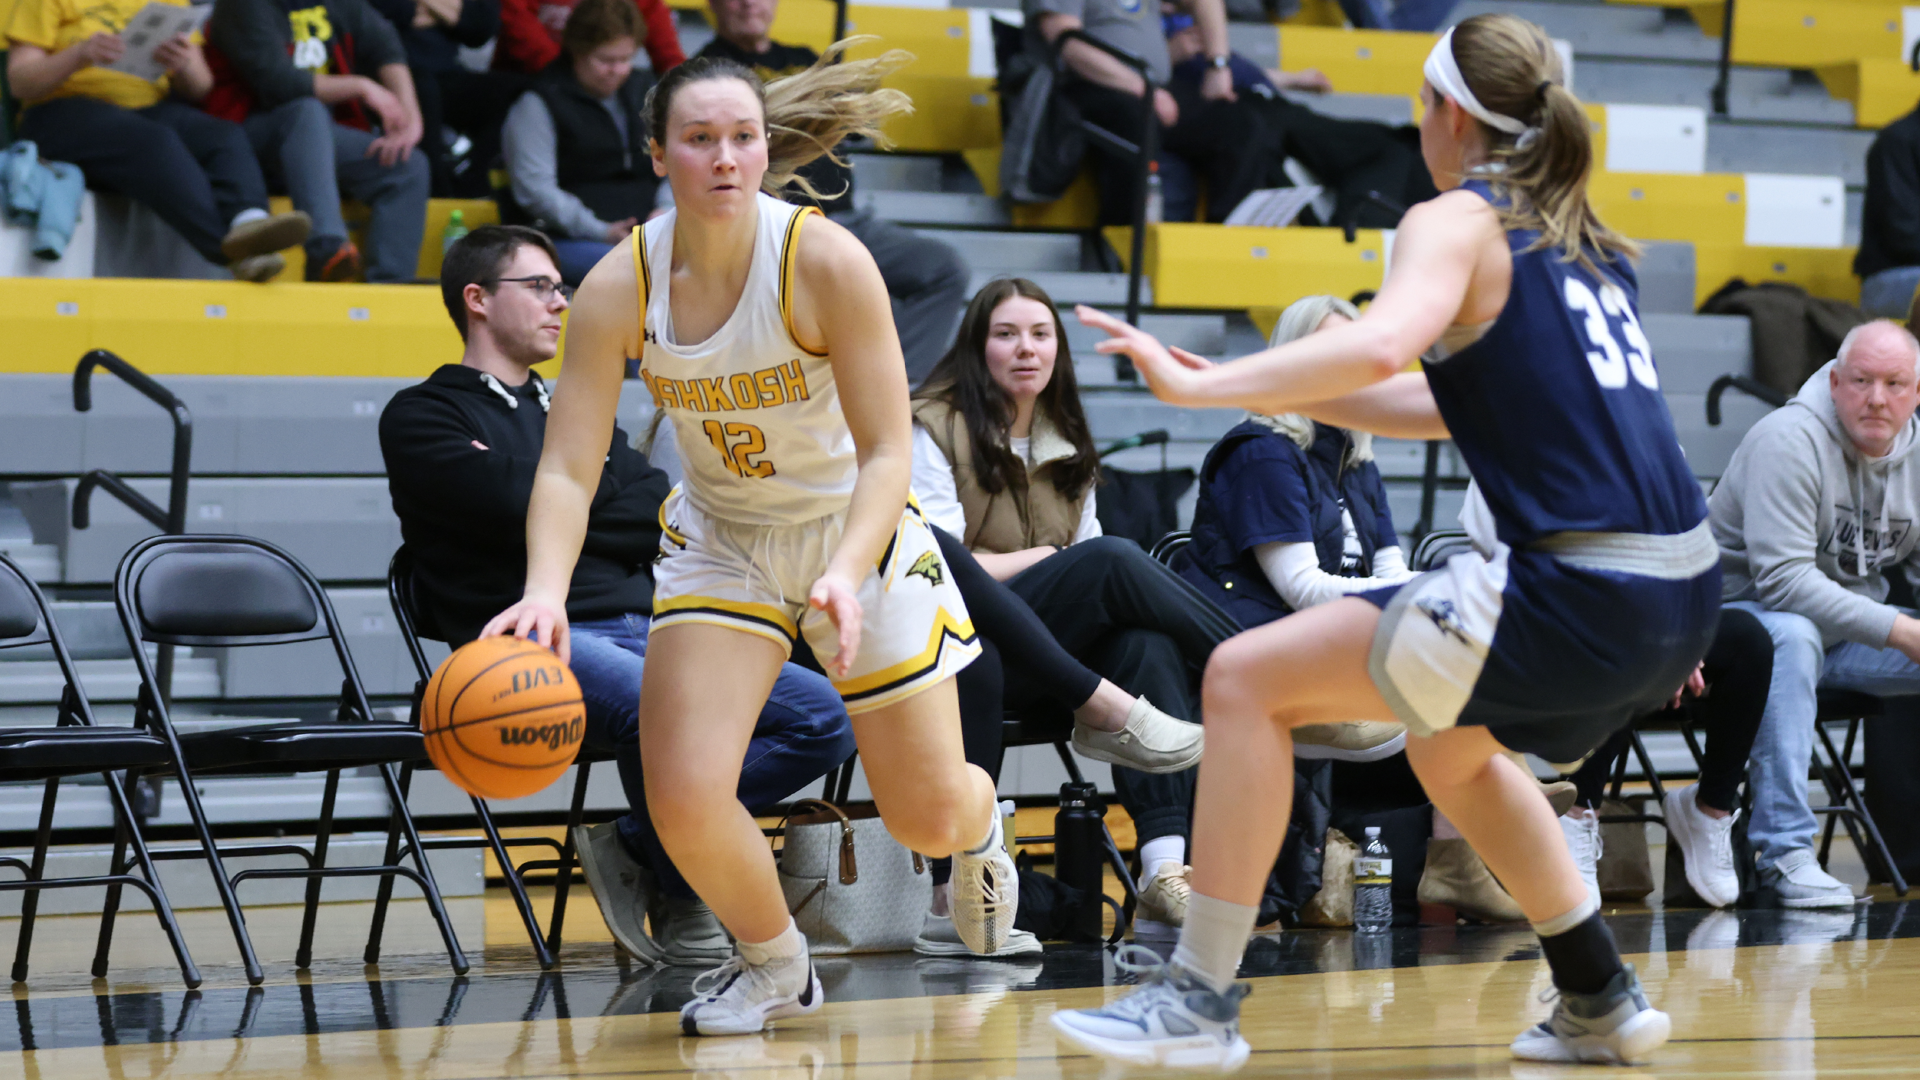 Bridget Froehlke scored 11 points and recorded four rebounds in the Titans victory over UW-Stout on Saturday night.